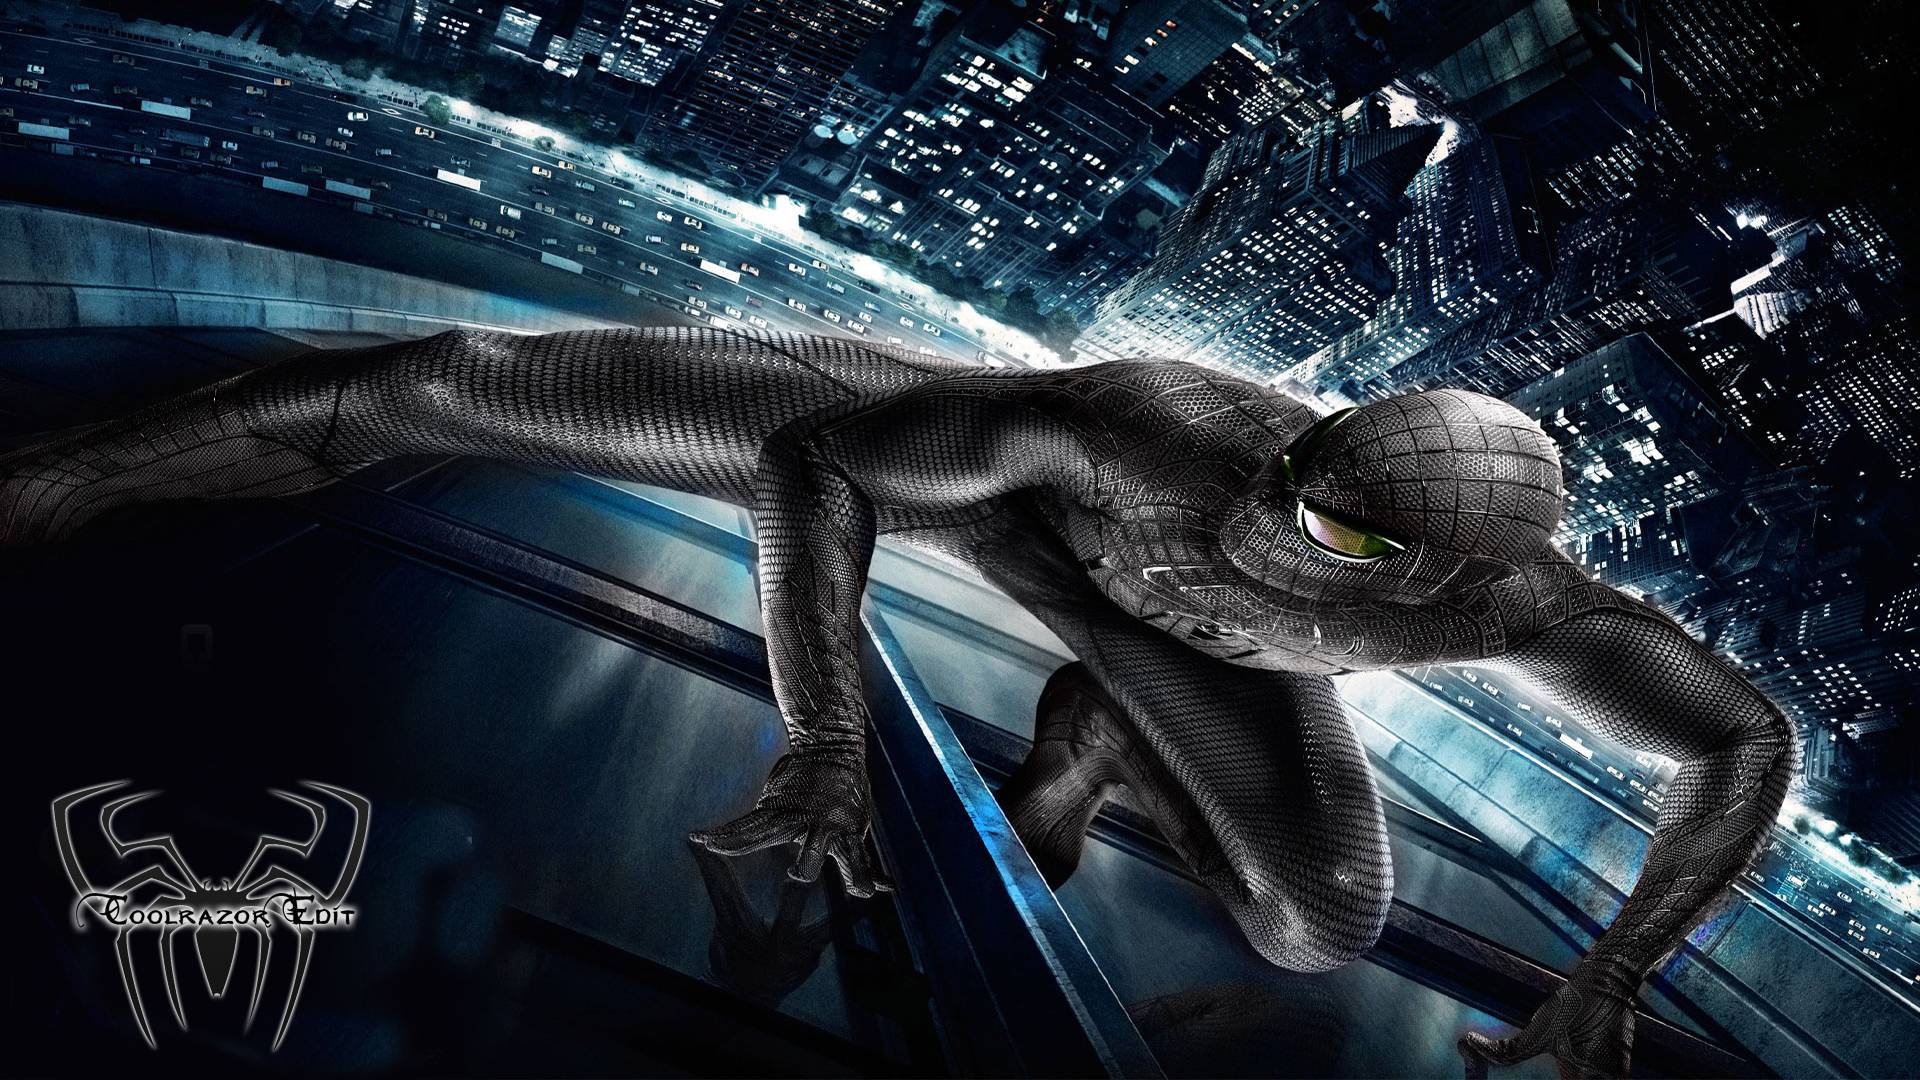 Download full size The Amazing Spiderman Spiderman wallpaper / 1920x1080